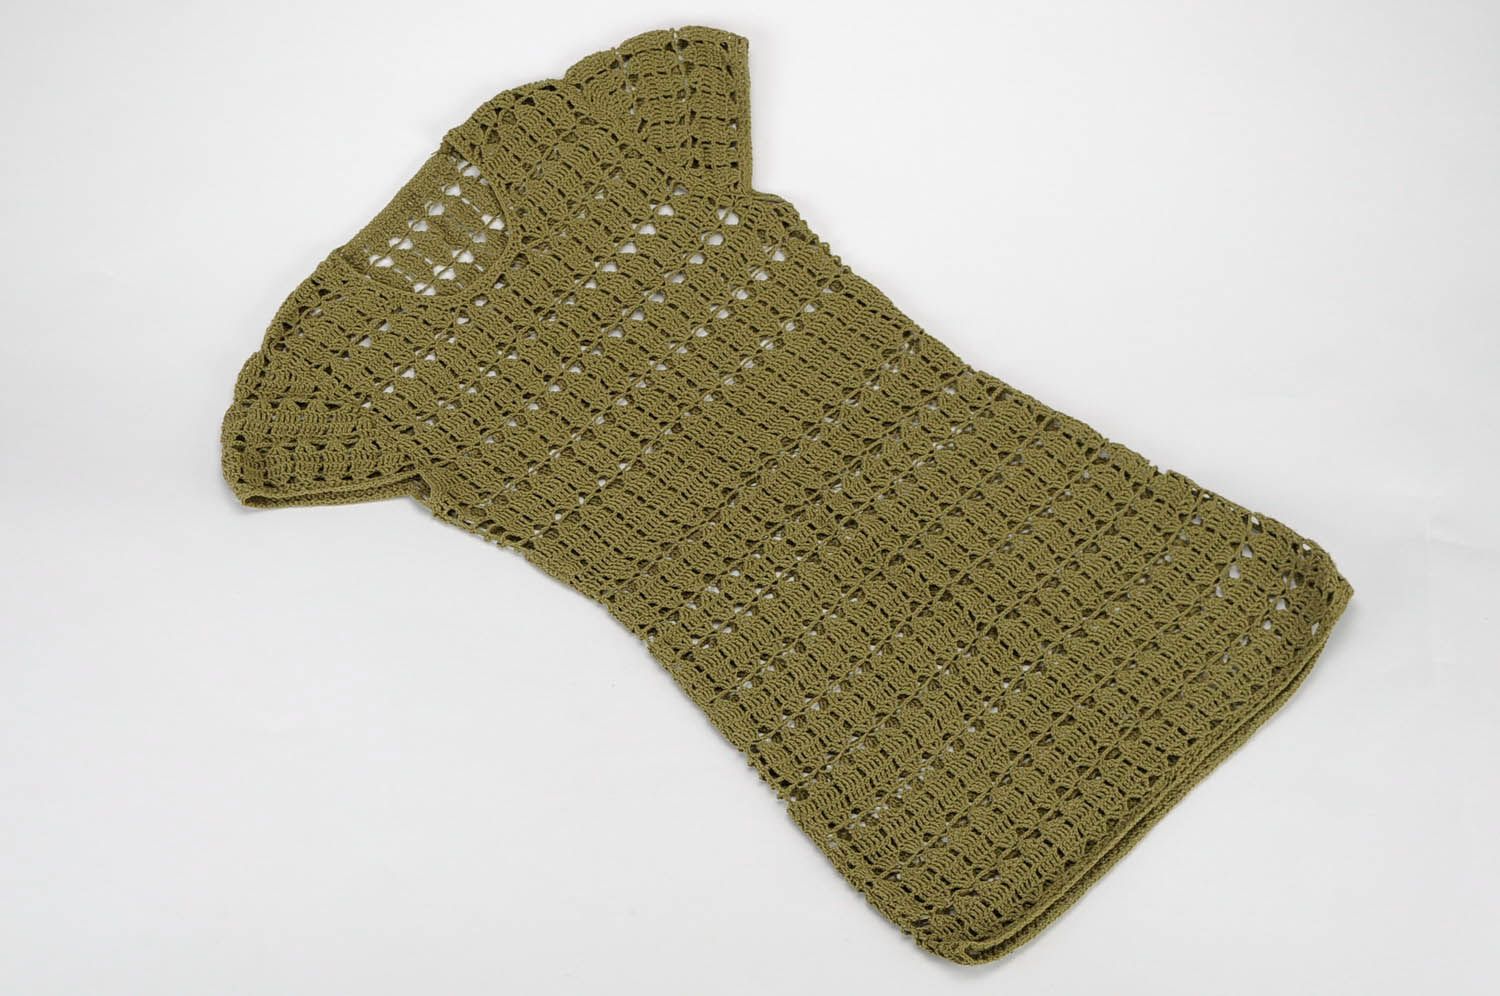 Crocheted tunic of olive color photo 3